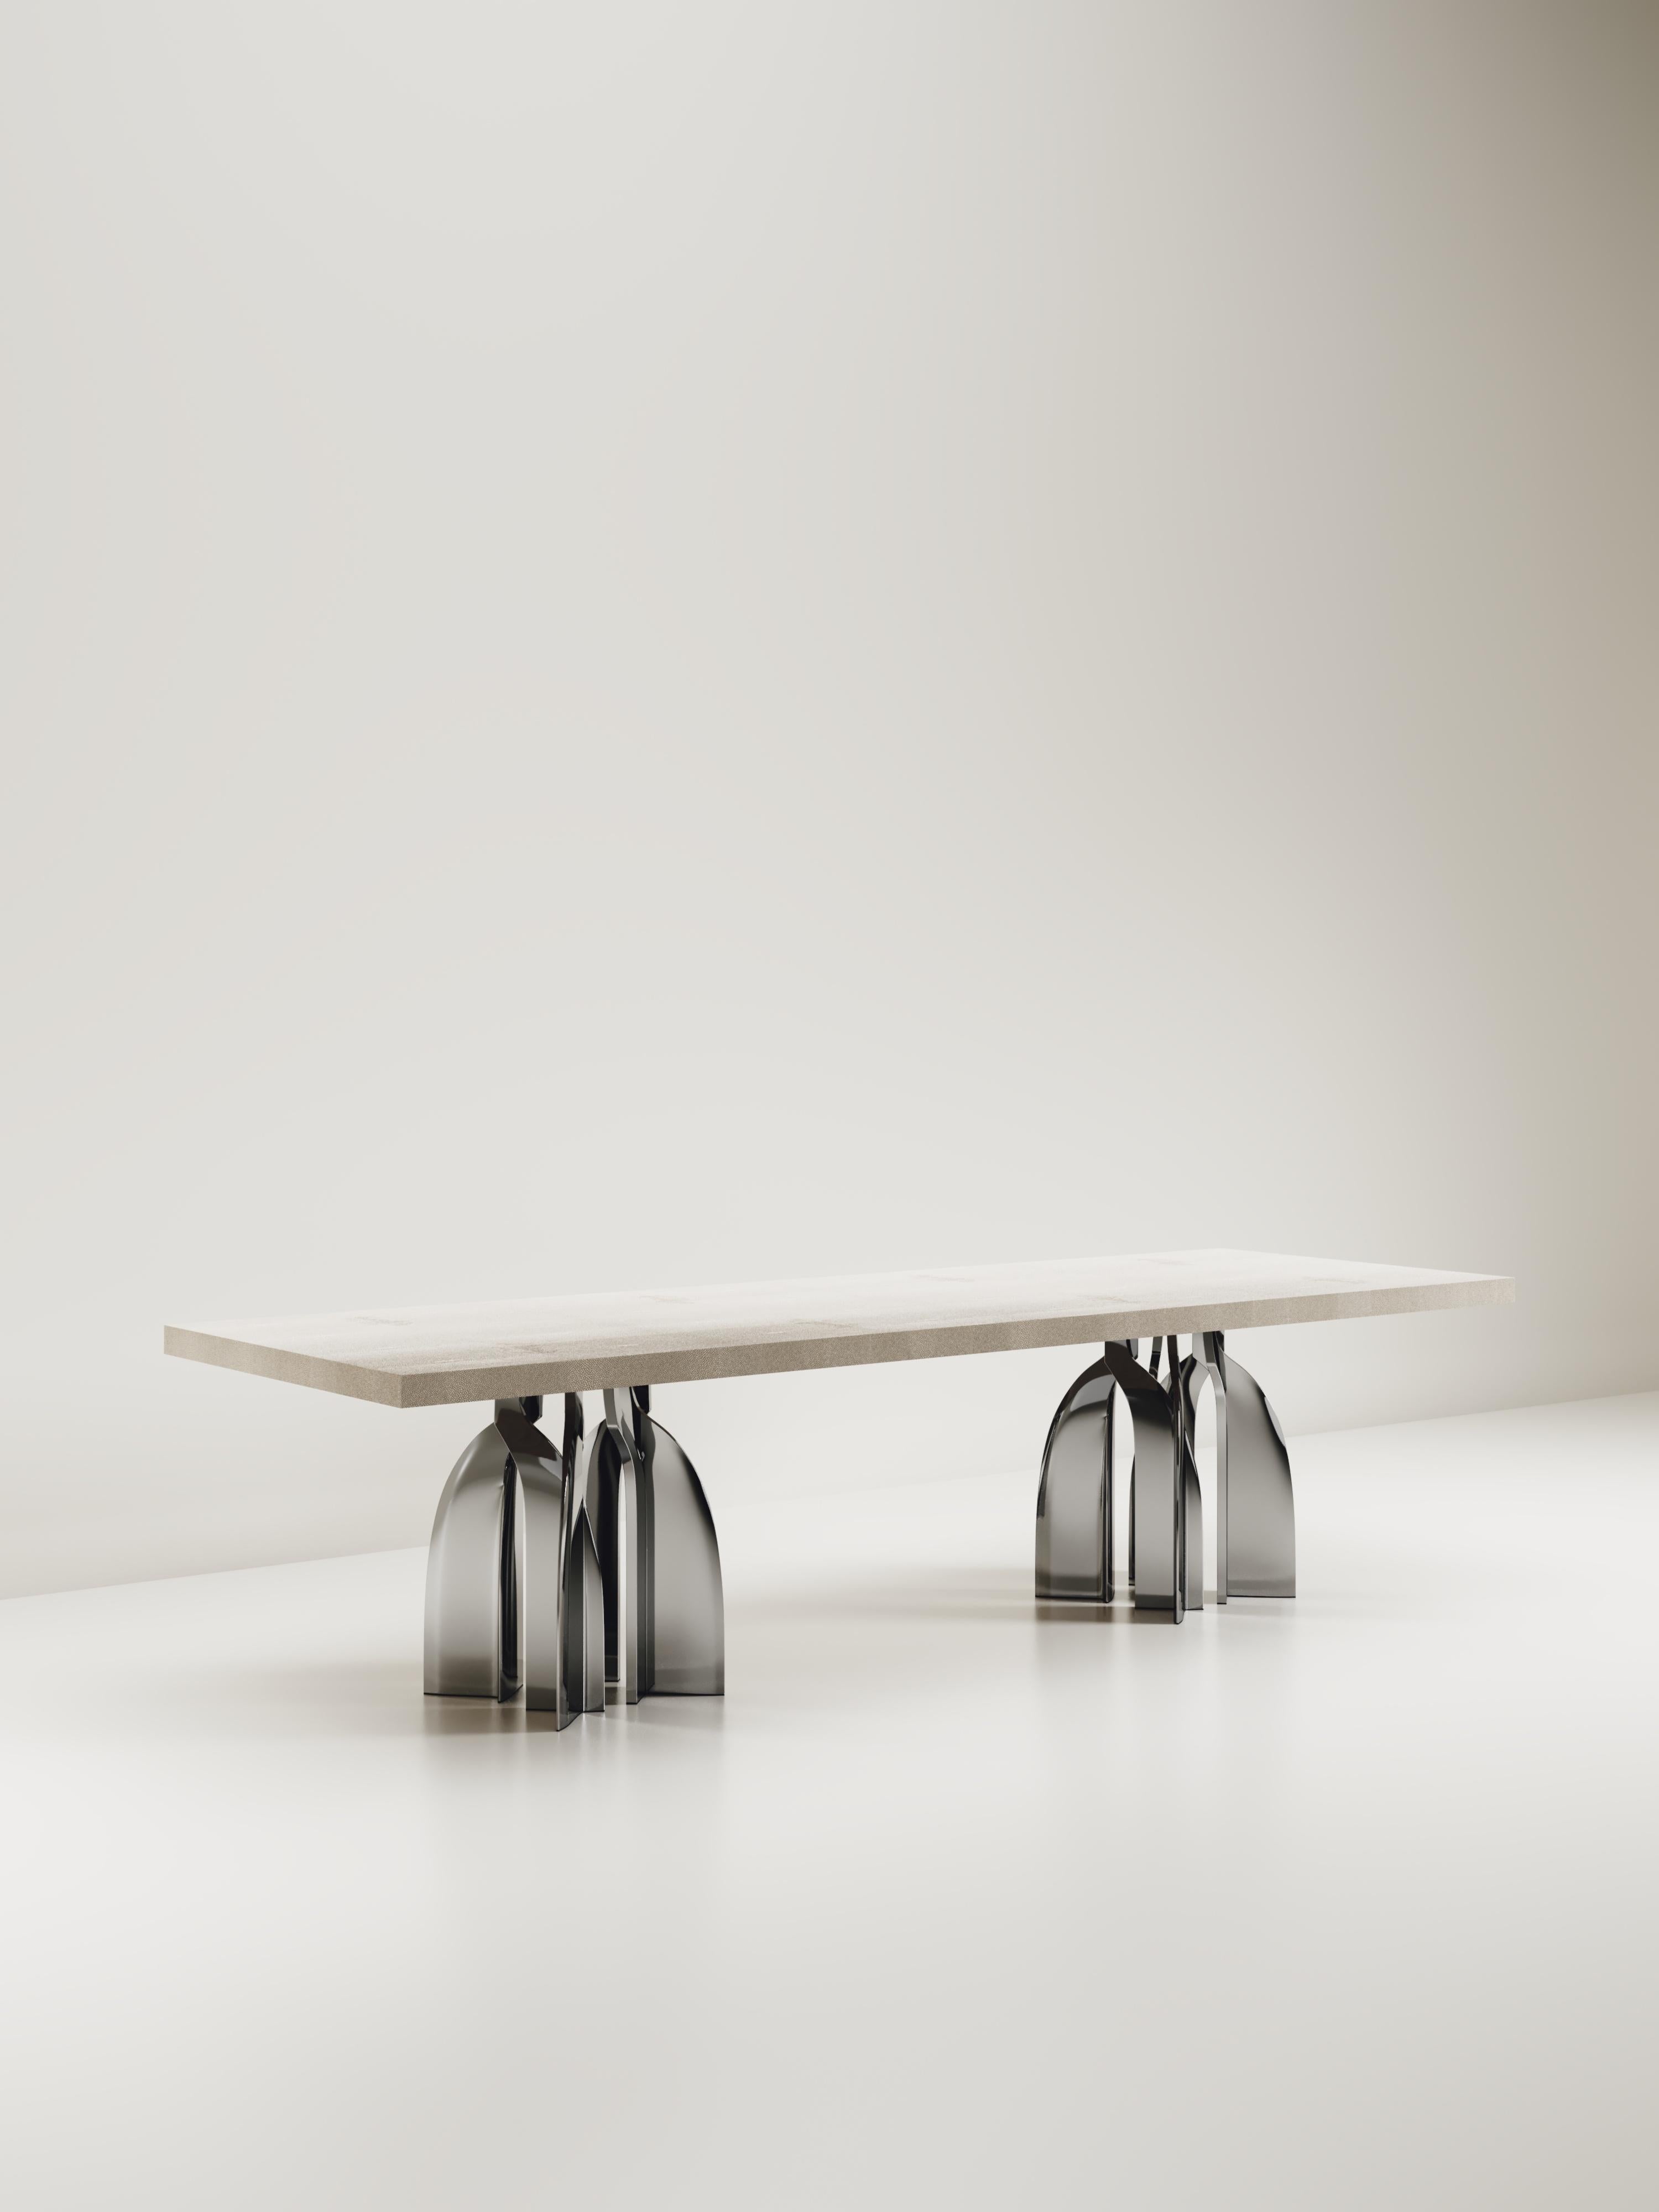 The Chital Dining table is a stunning piece, a statement in any space. The cream shagreen inlaid top is sleek and dramatic, and followed by brushed stainless steel sculptural legs clustered together as the base. This piece is designed by Kifu